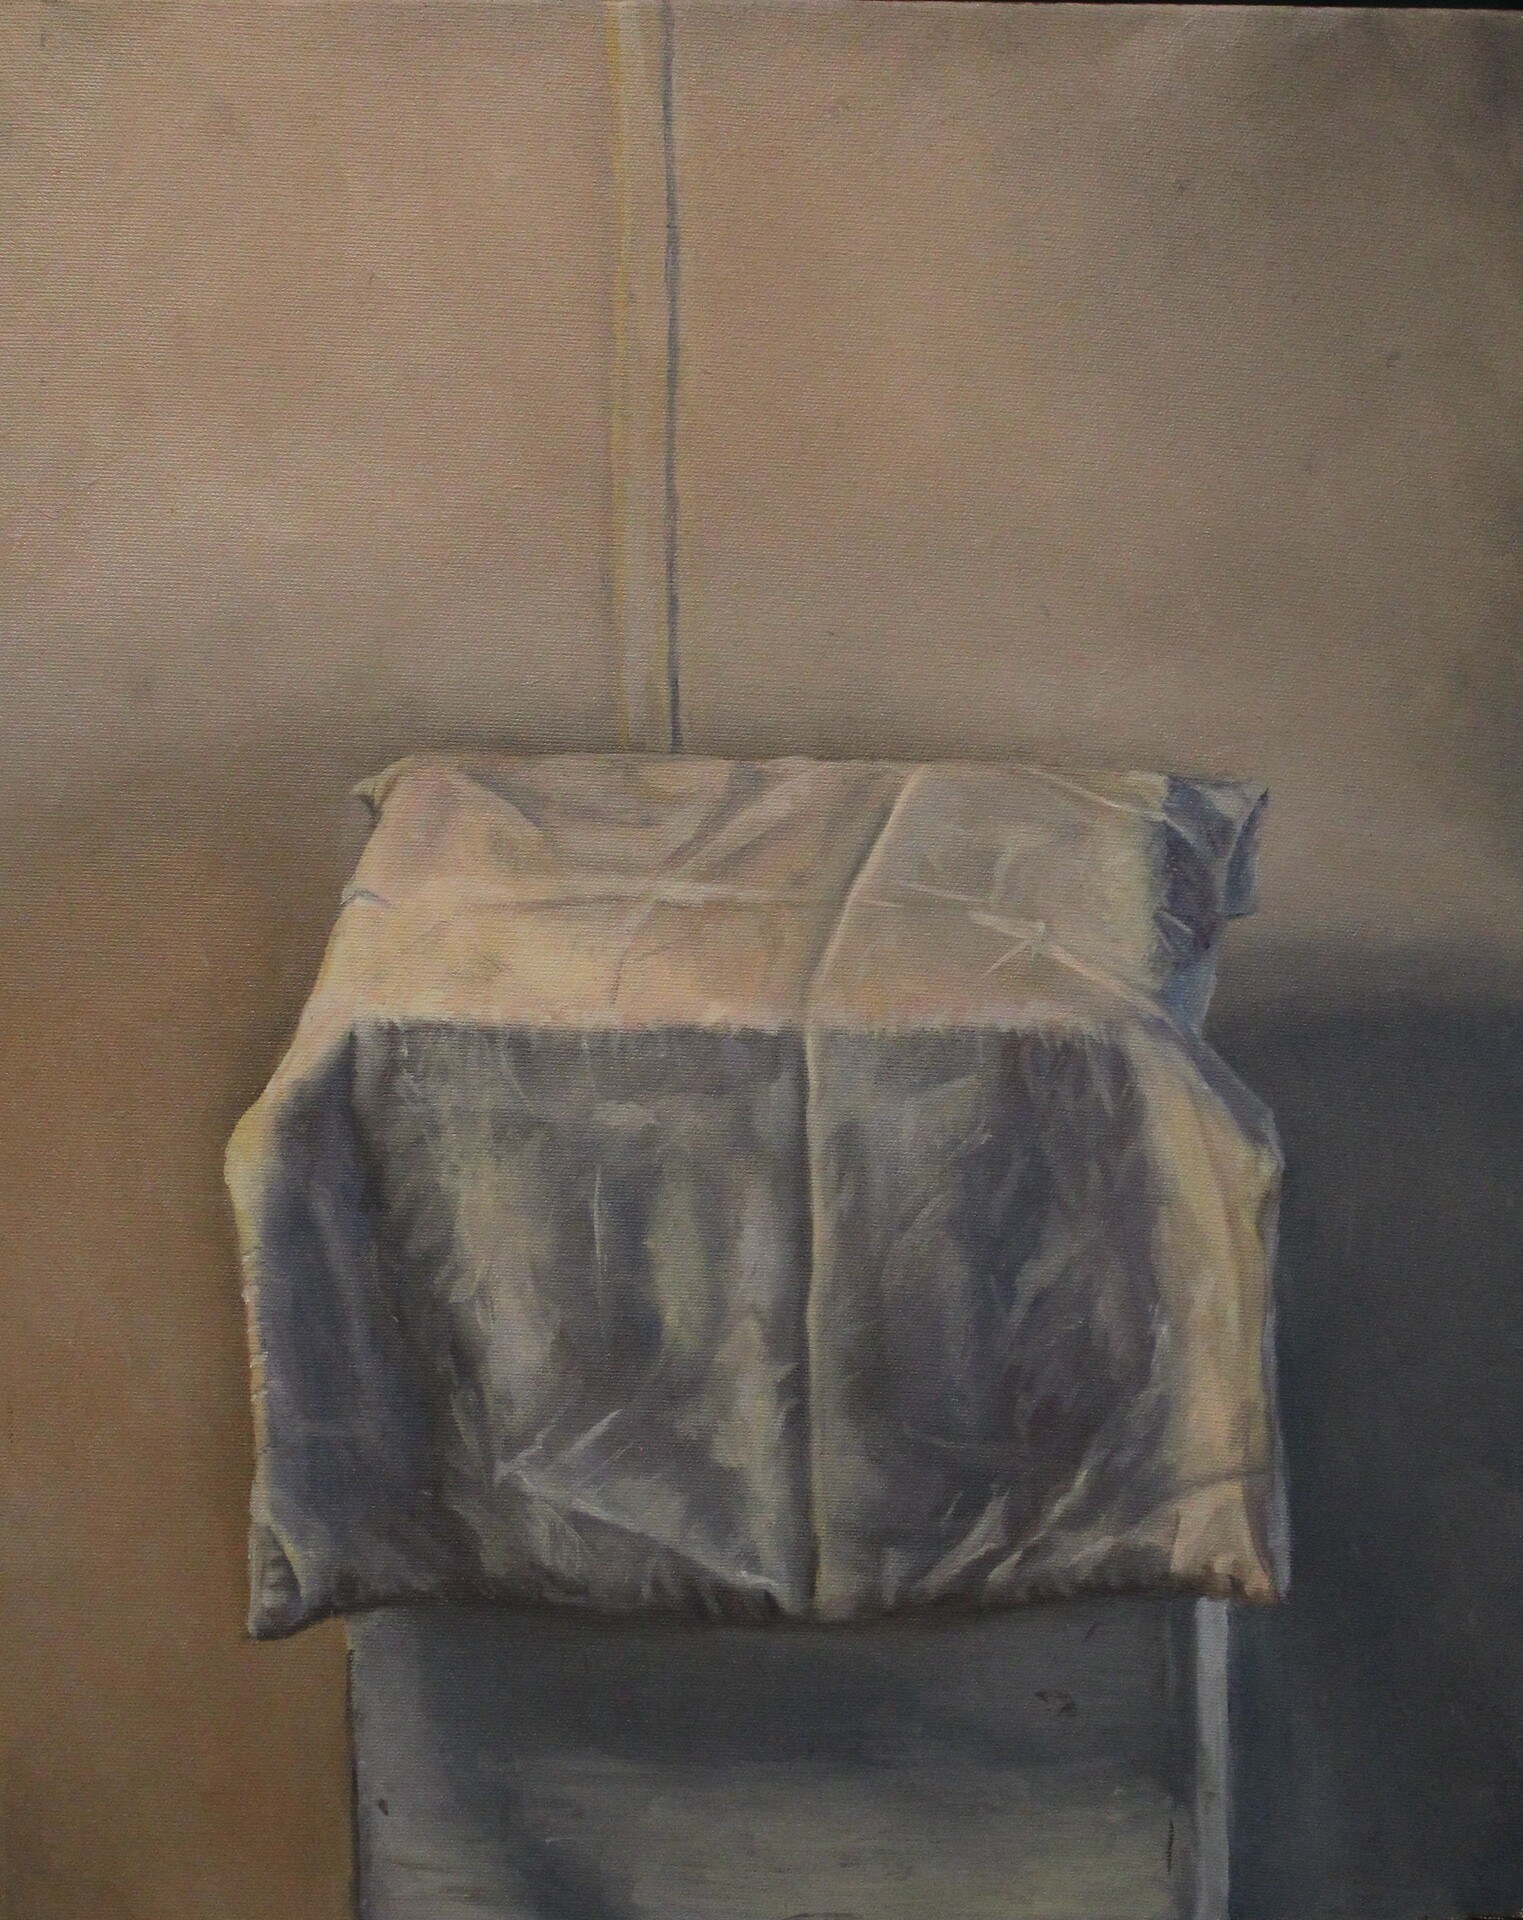 Painting of a blanket on a table